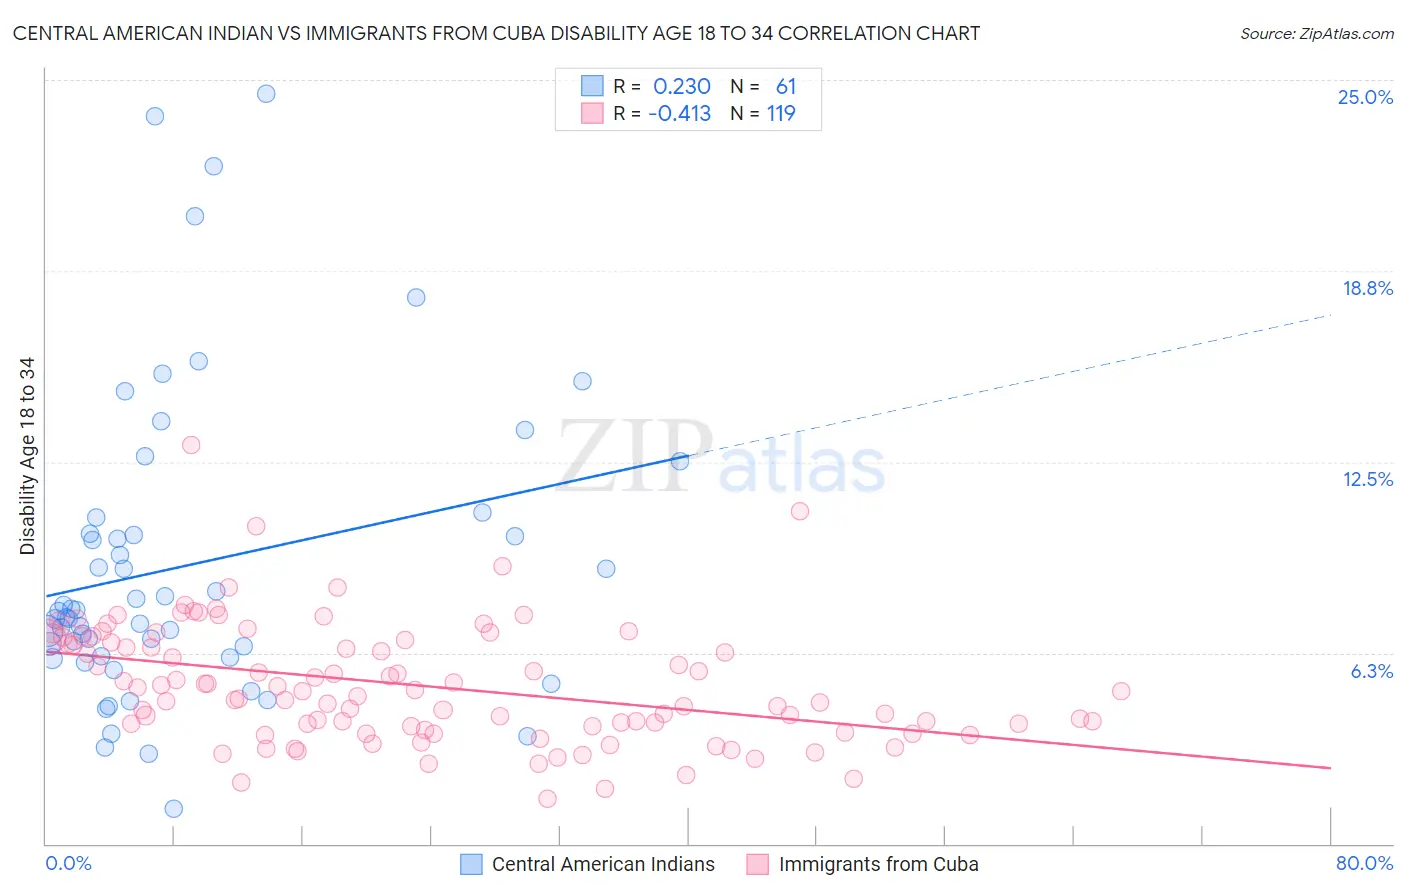 Central American Indian vs Immigrants from Cuba Disability Age 18 to 34